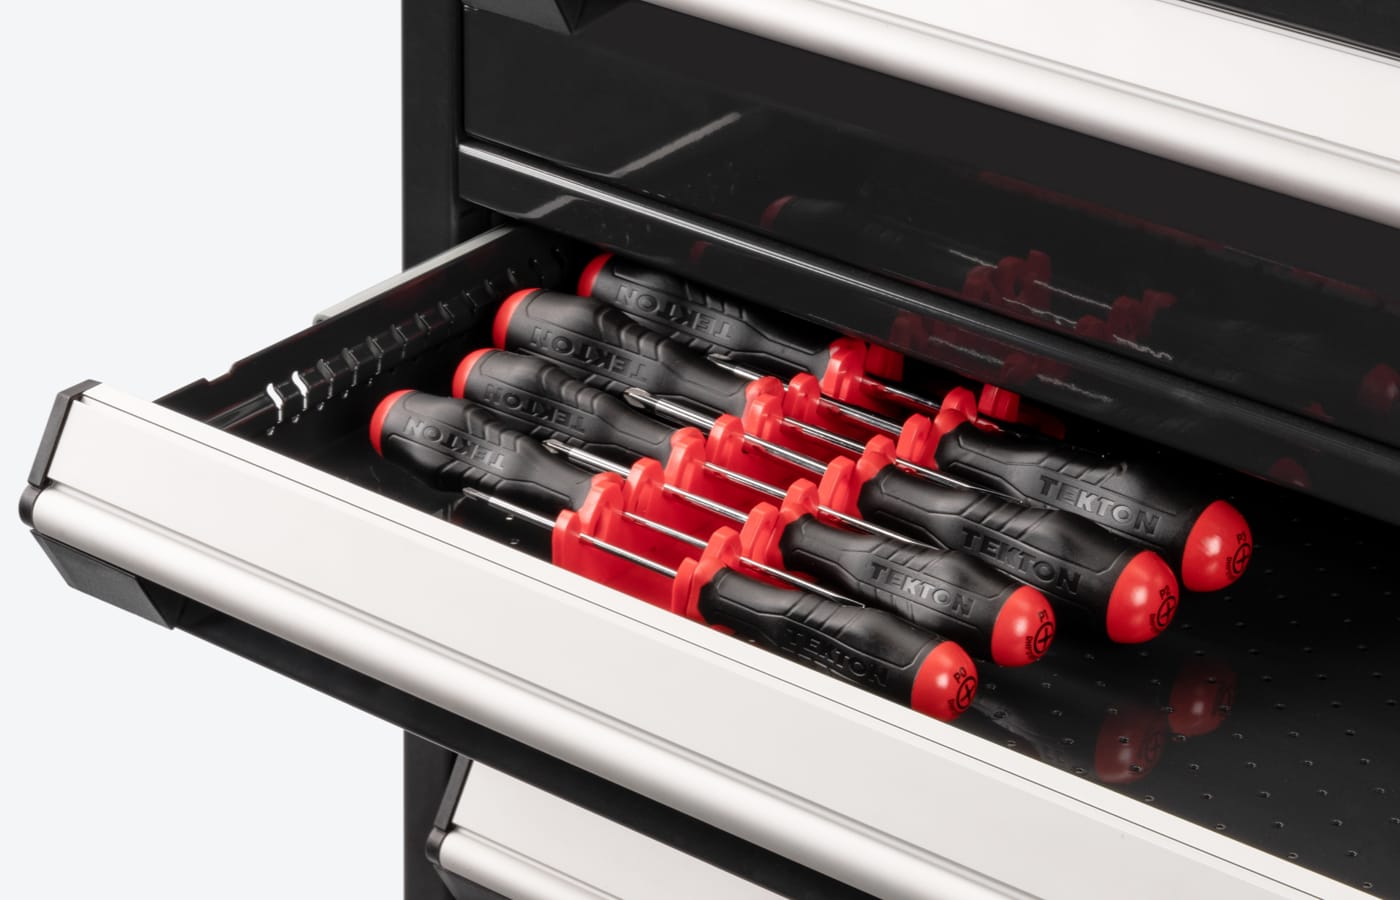 TEKTON Screwdriver Holder in a shallow drawer